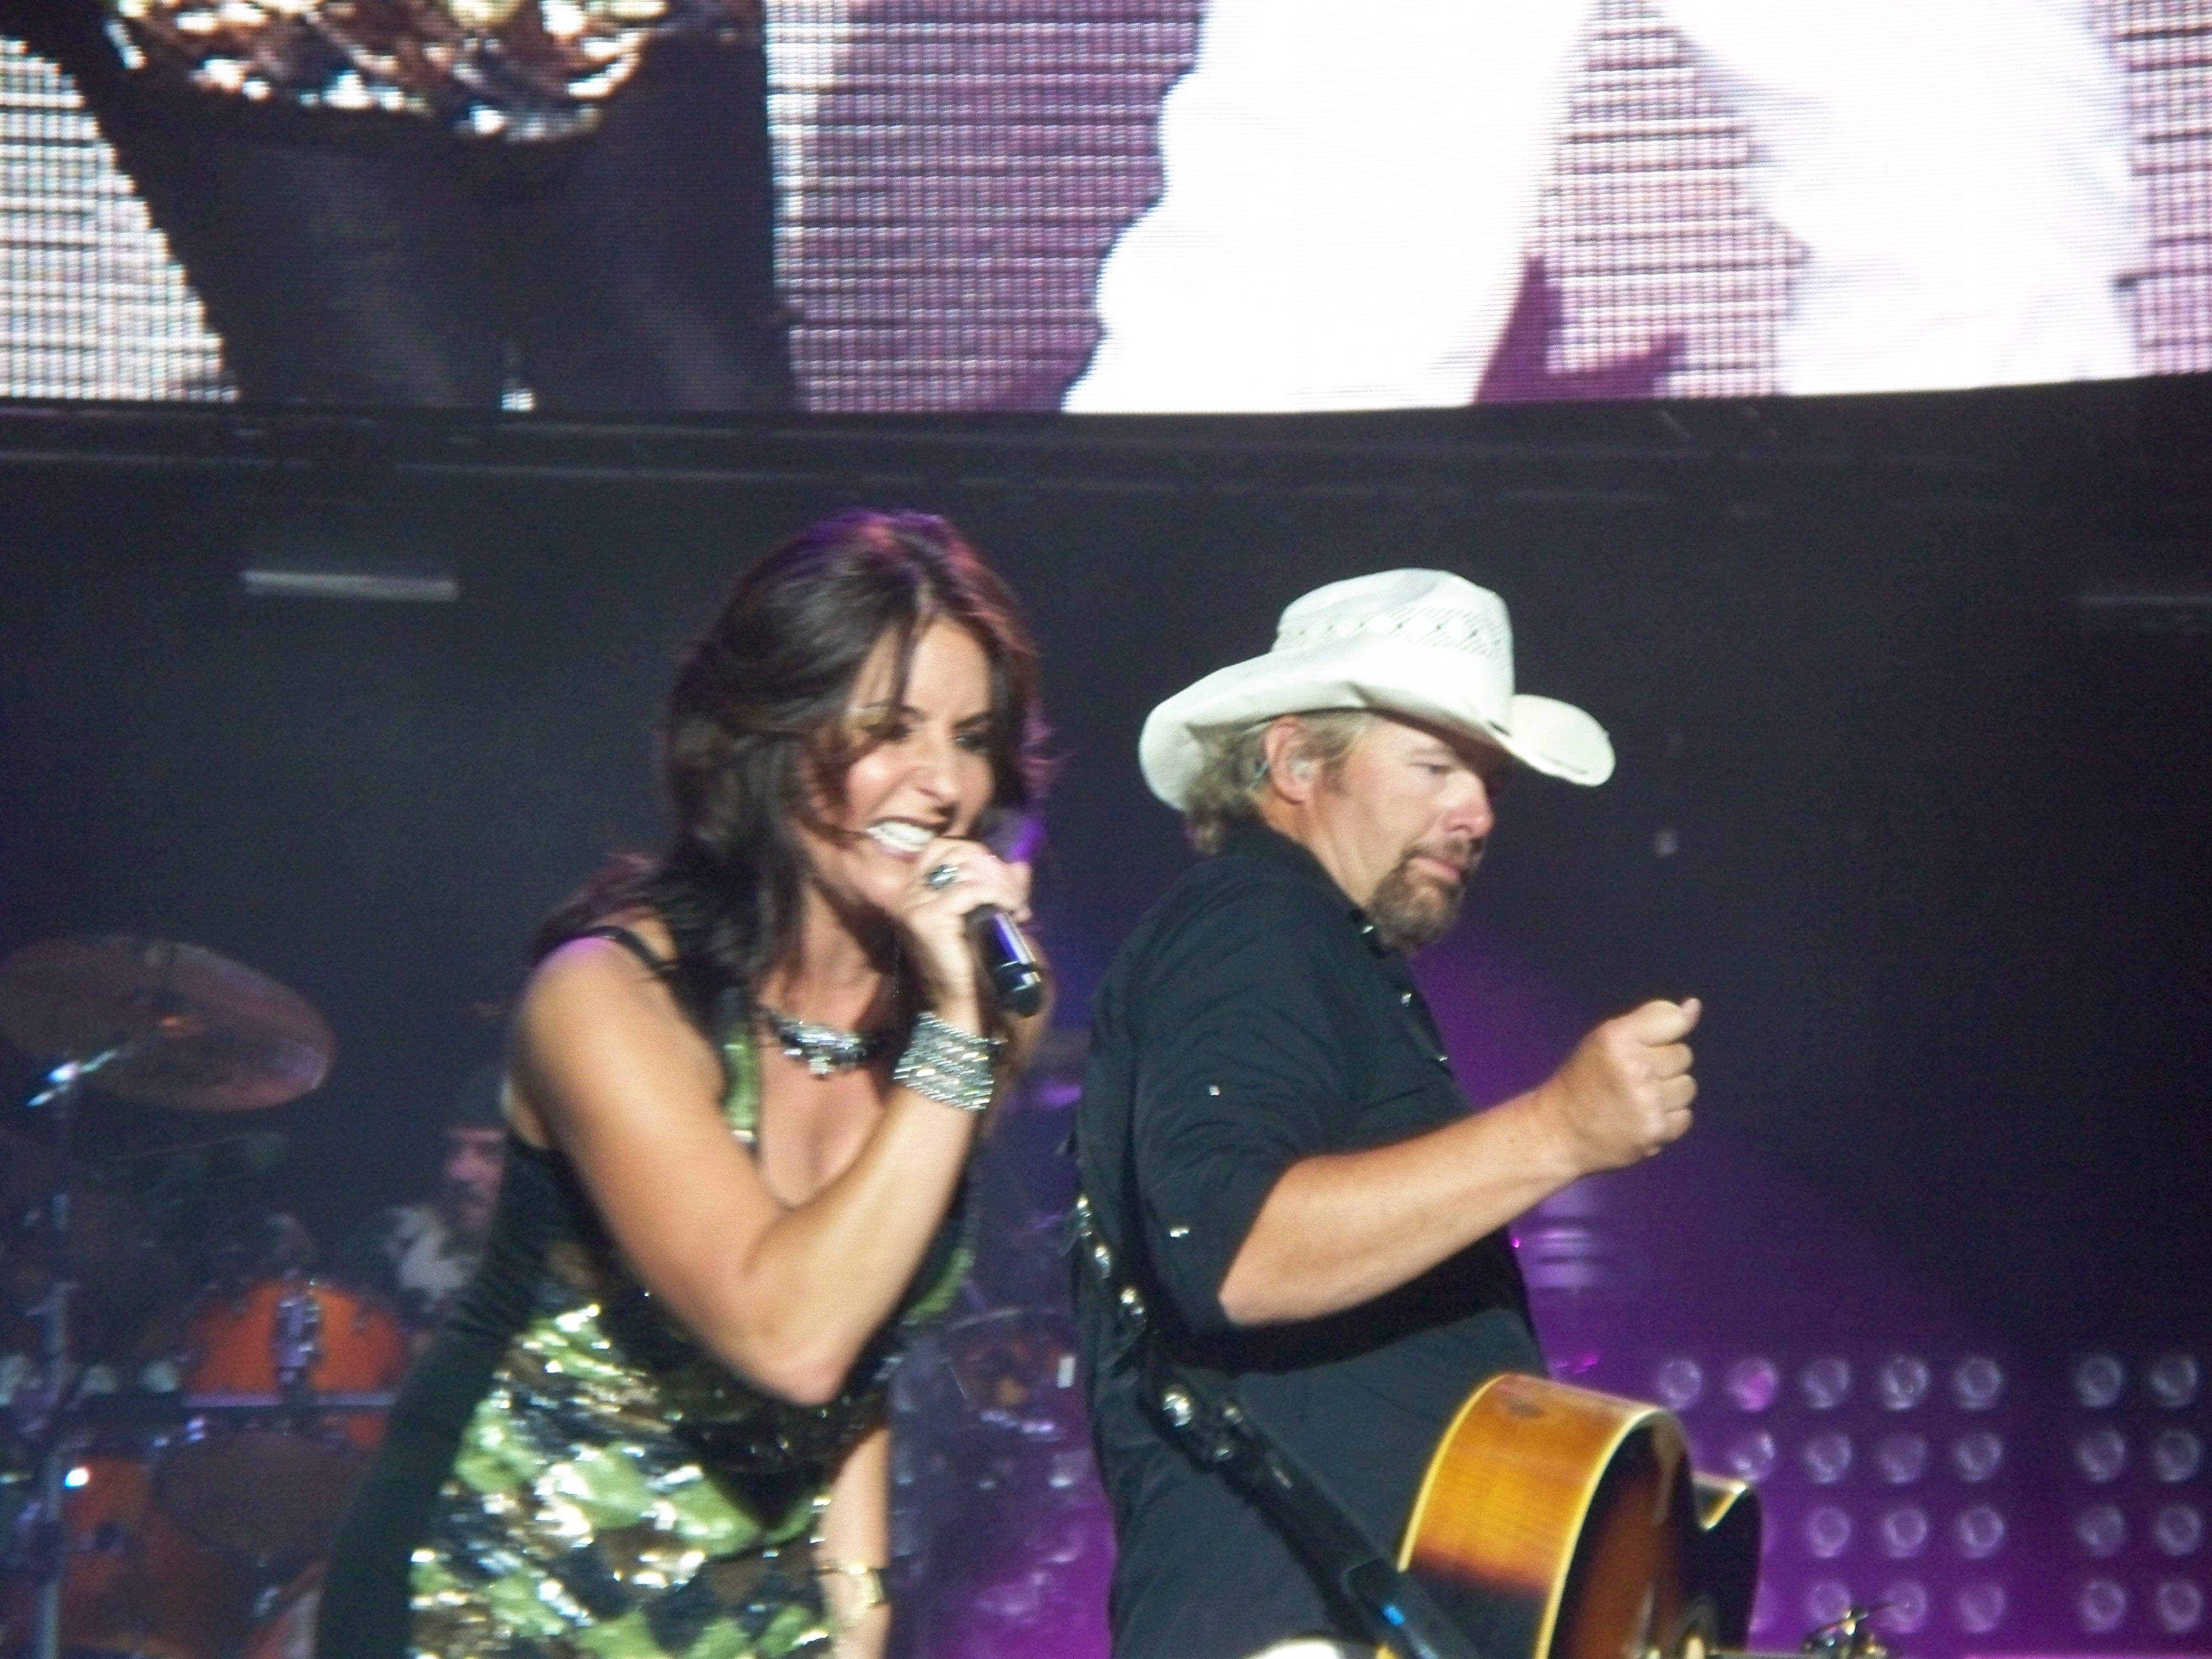 Toby Keith and MIca Roberts at Red Rock | Cowboy hats, Style, Concert